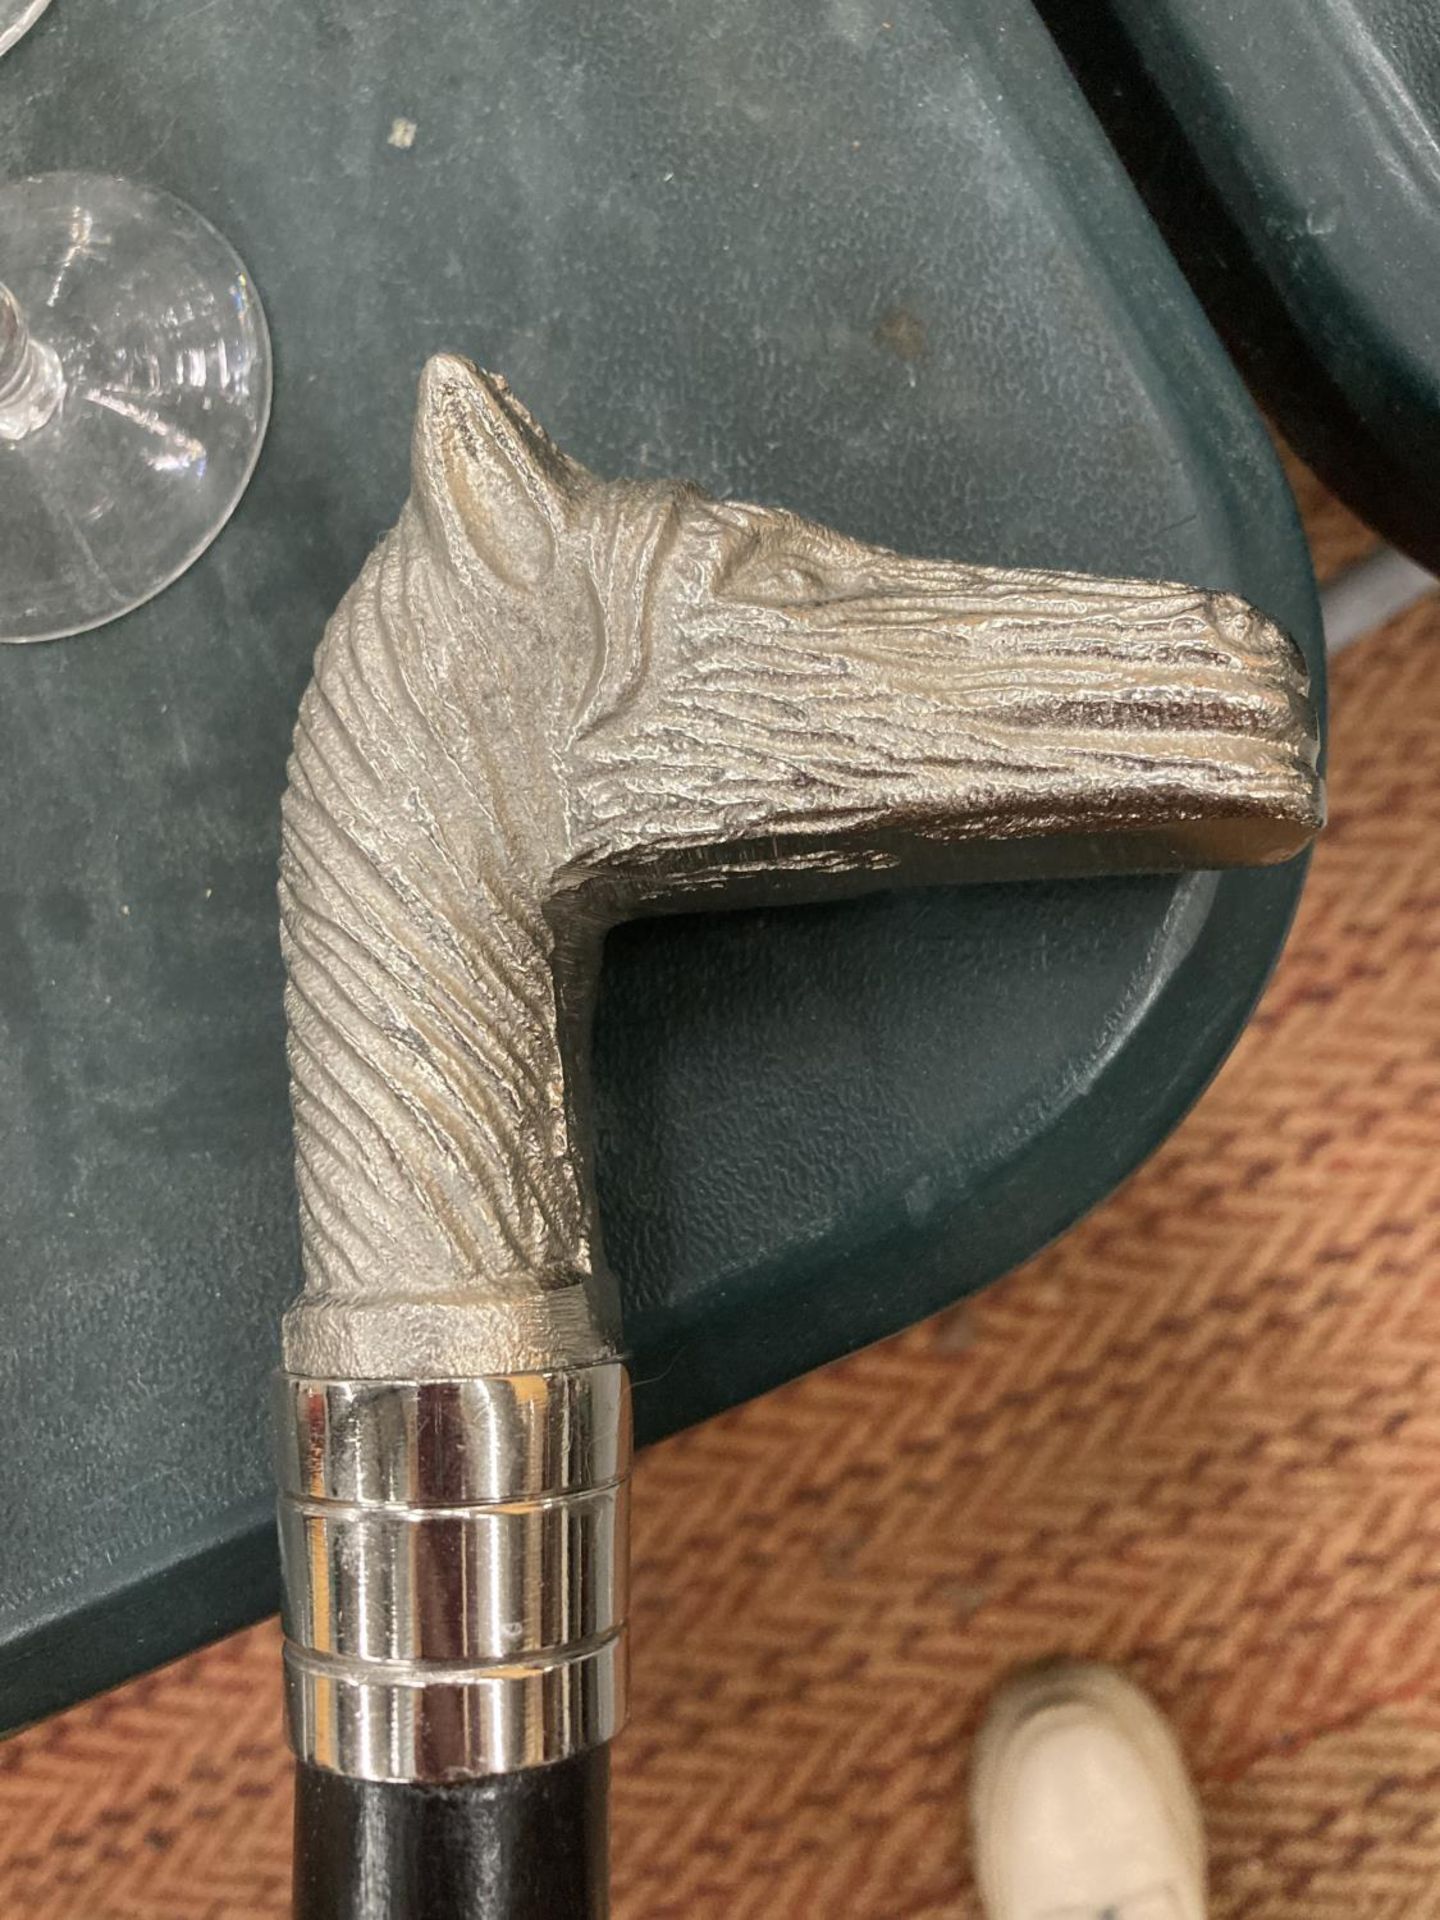 A WALKING STICK WITH A CHROME HORSES HEAD HANDLE - Image 2 of 3